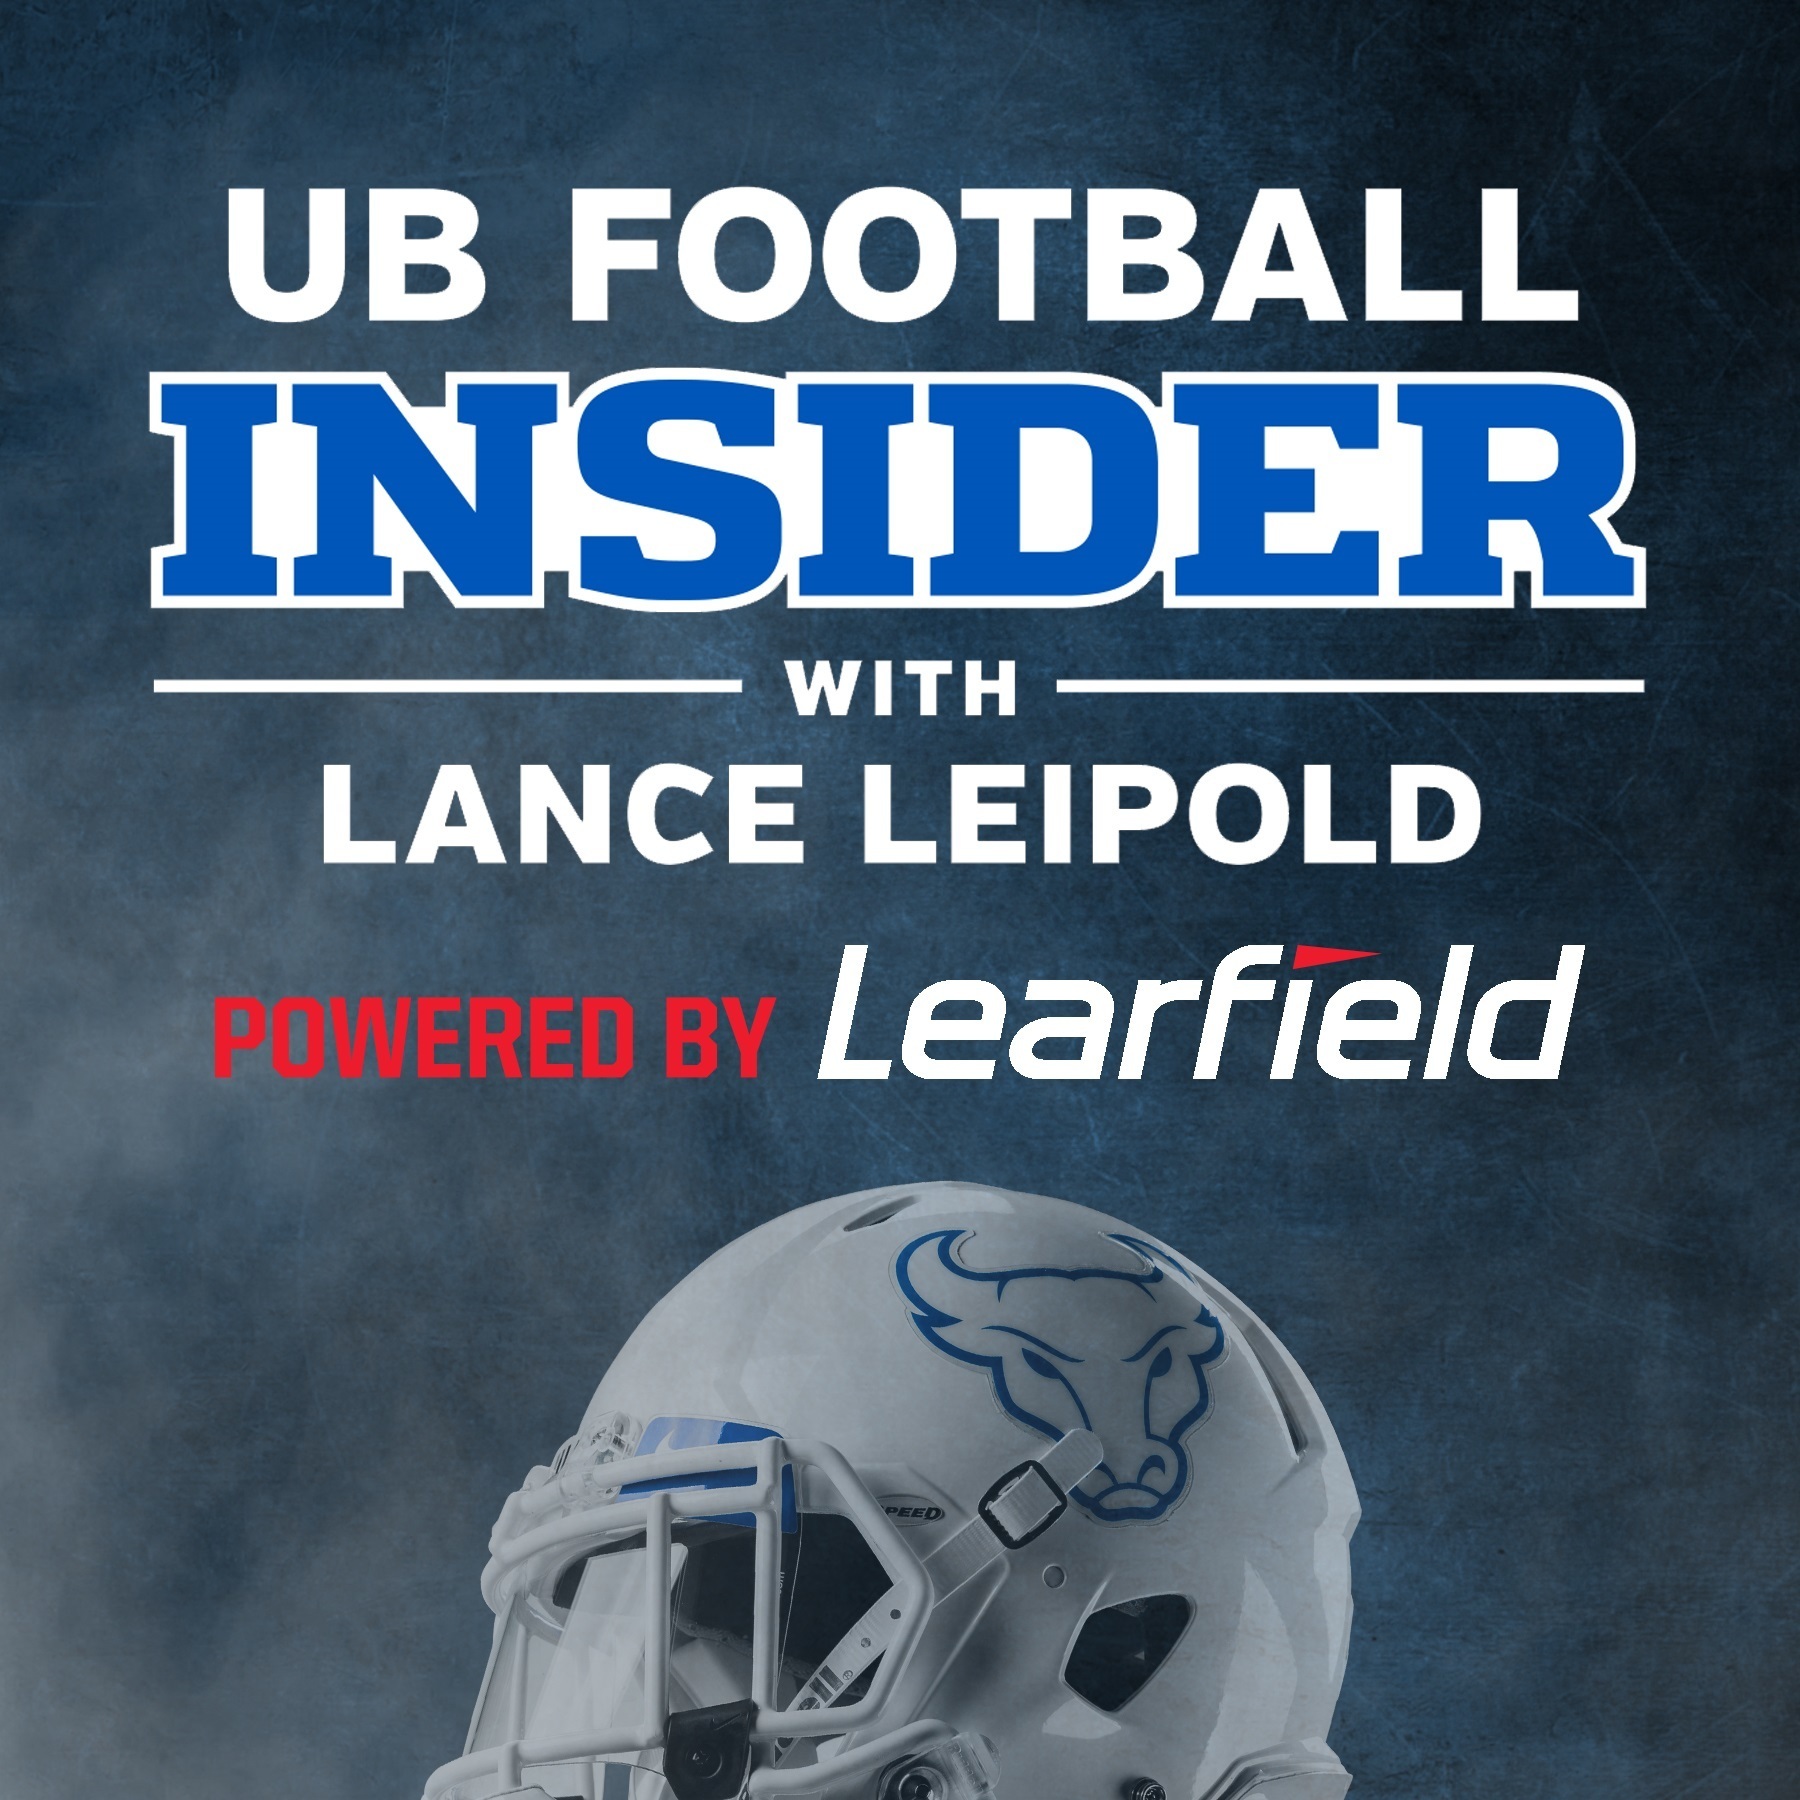 UB Football Insider with Lance Leipold is coming!